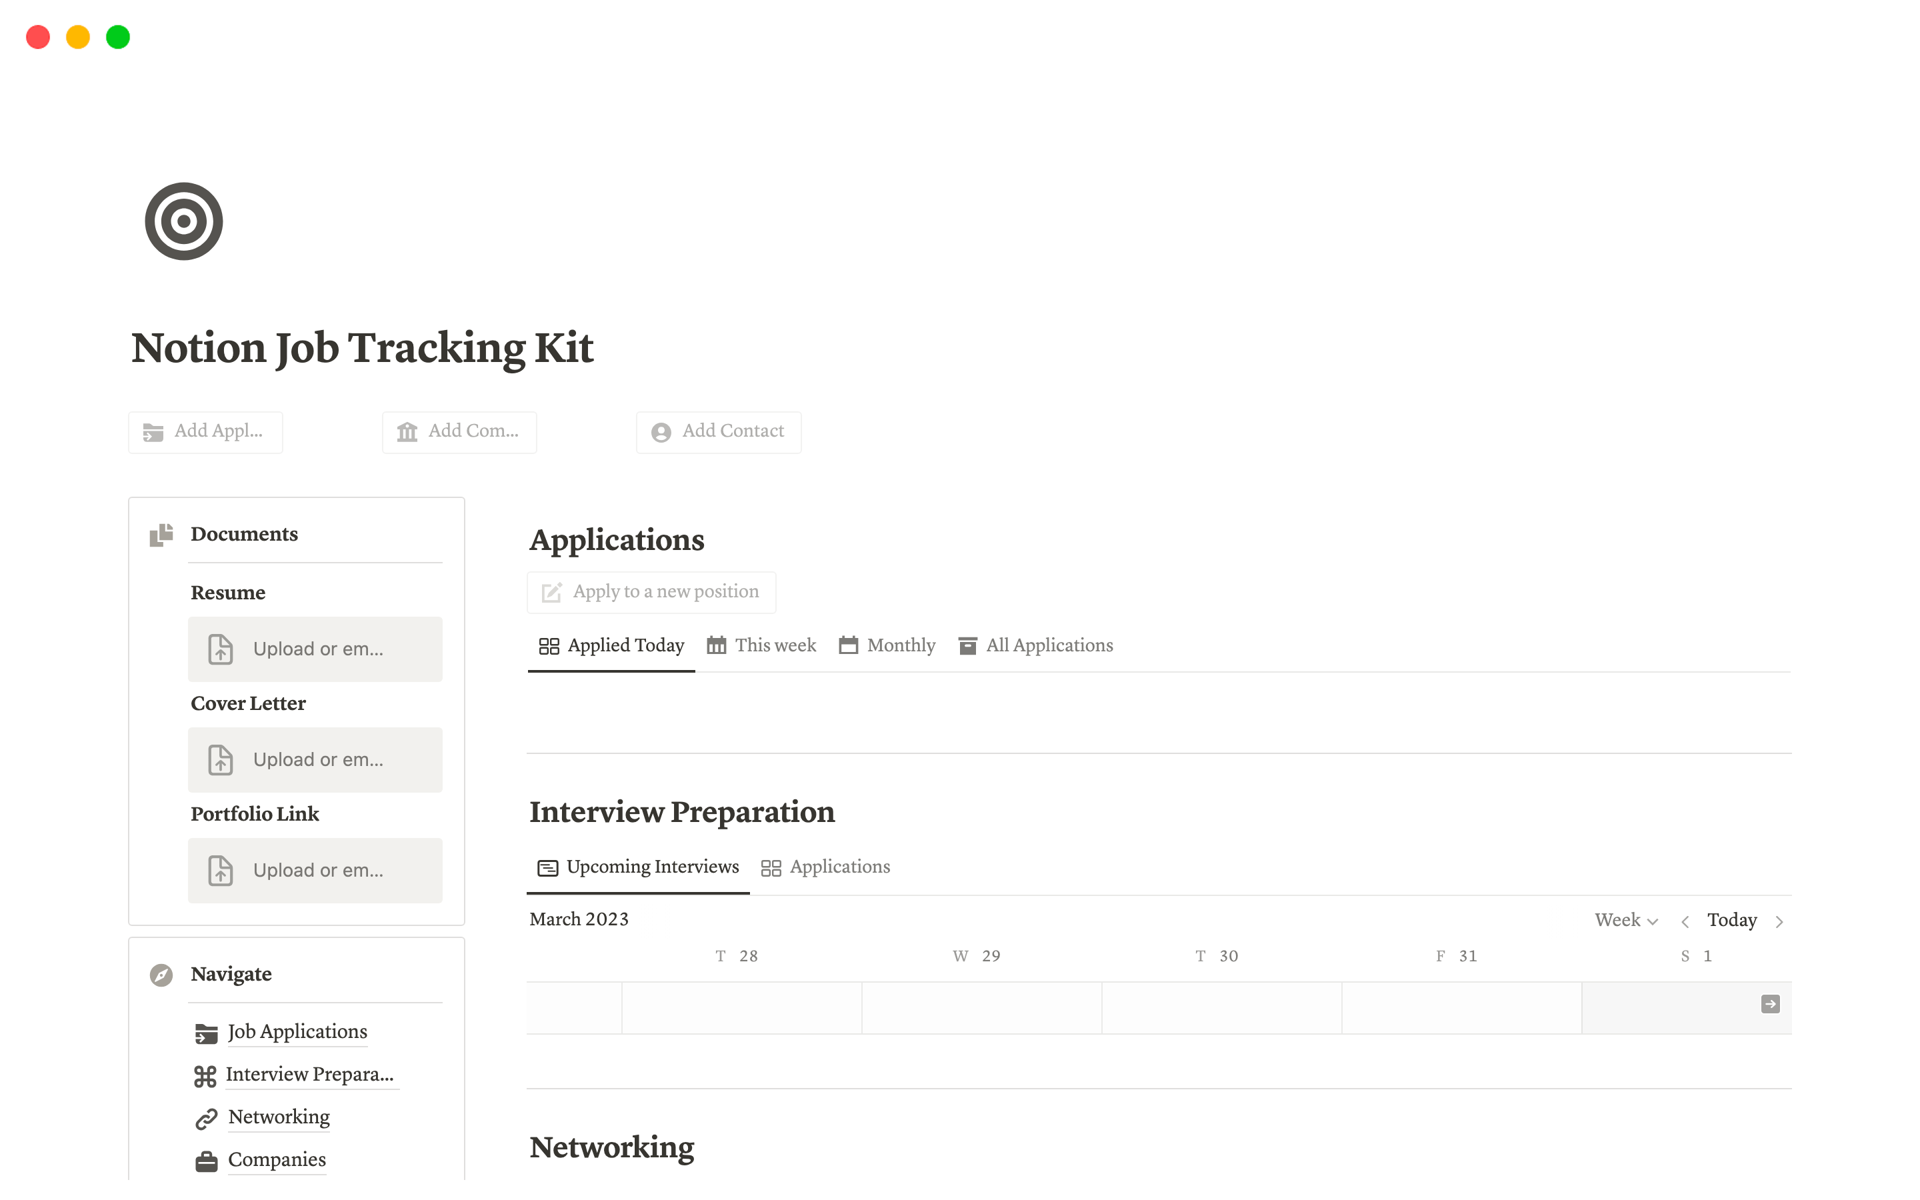 A comprehensive Notion job search template to help you organize applications, track networking contacts, set career goals, and land your next opportunity.

